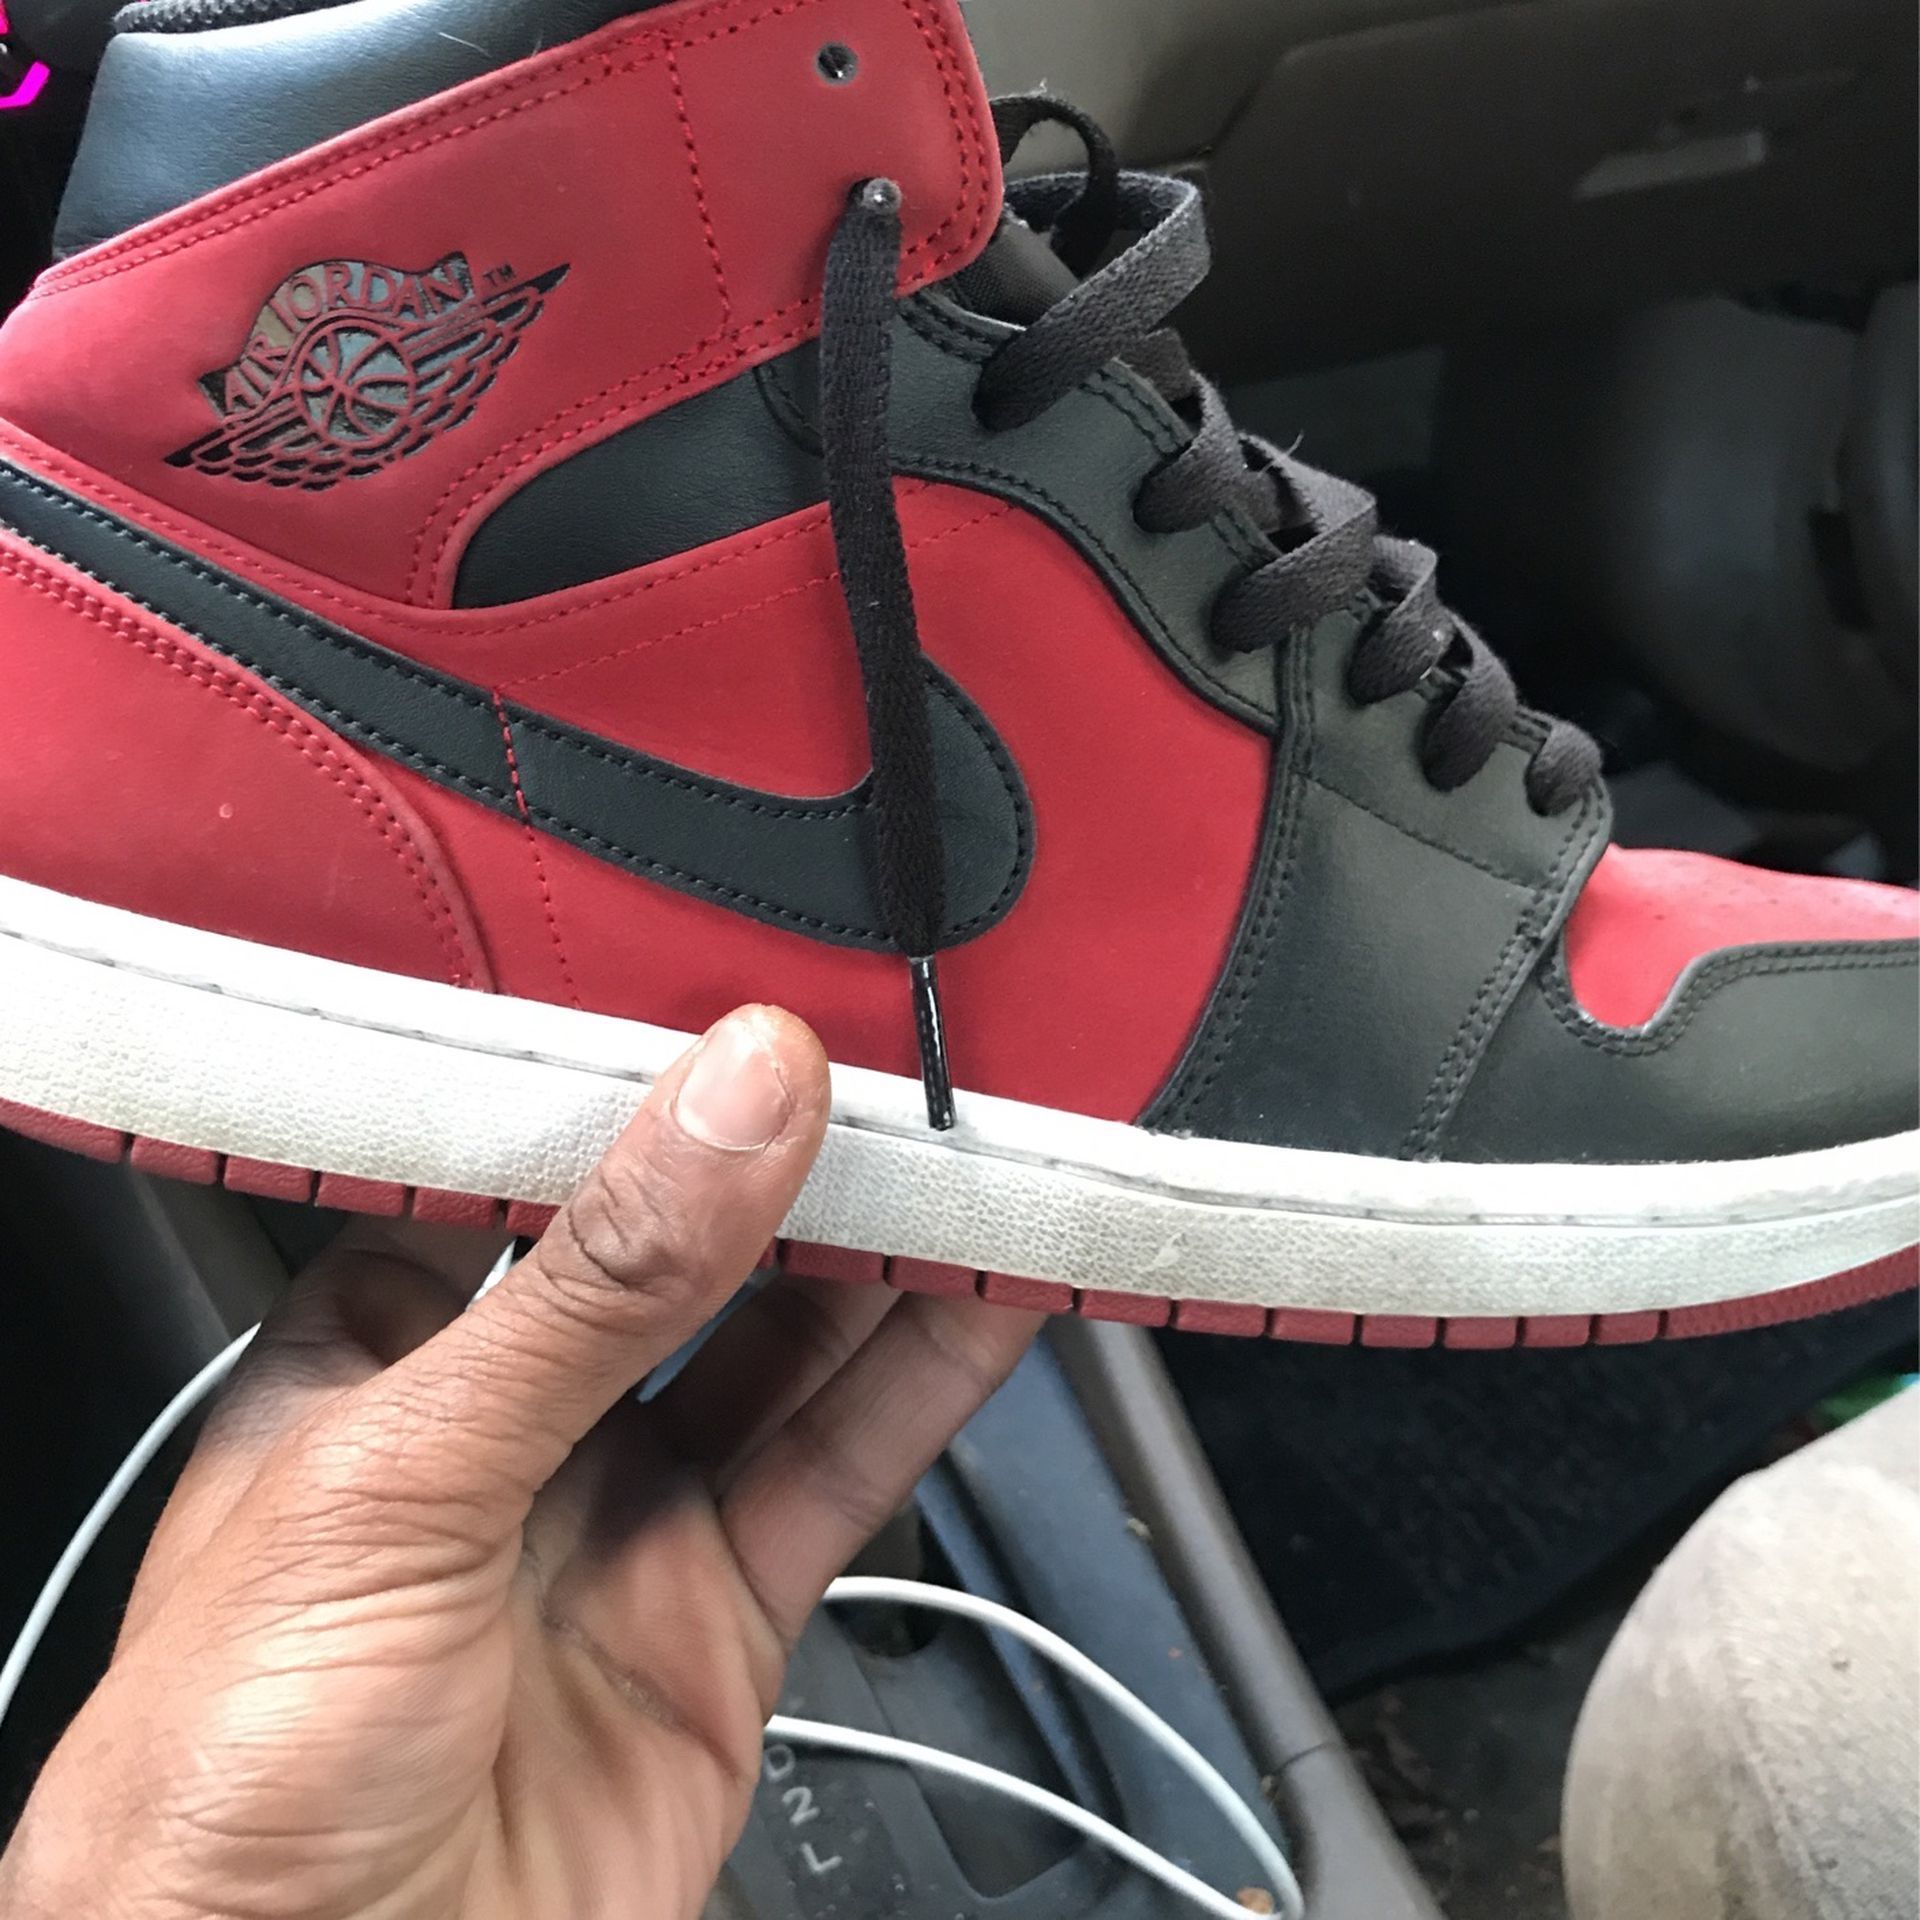 Jordan Retro 1 Red And Black “banned Versions” Size 11